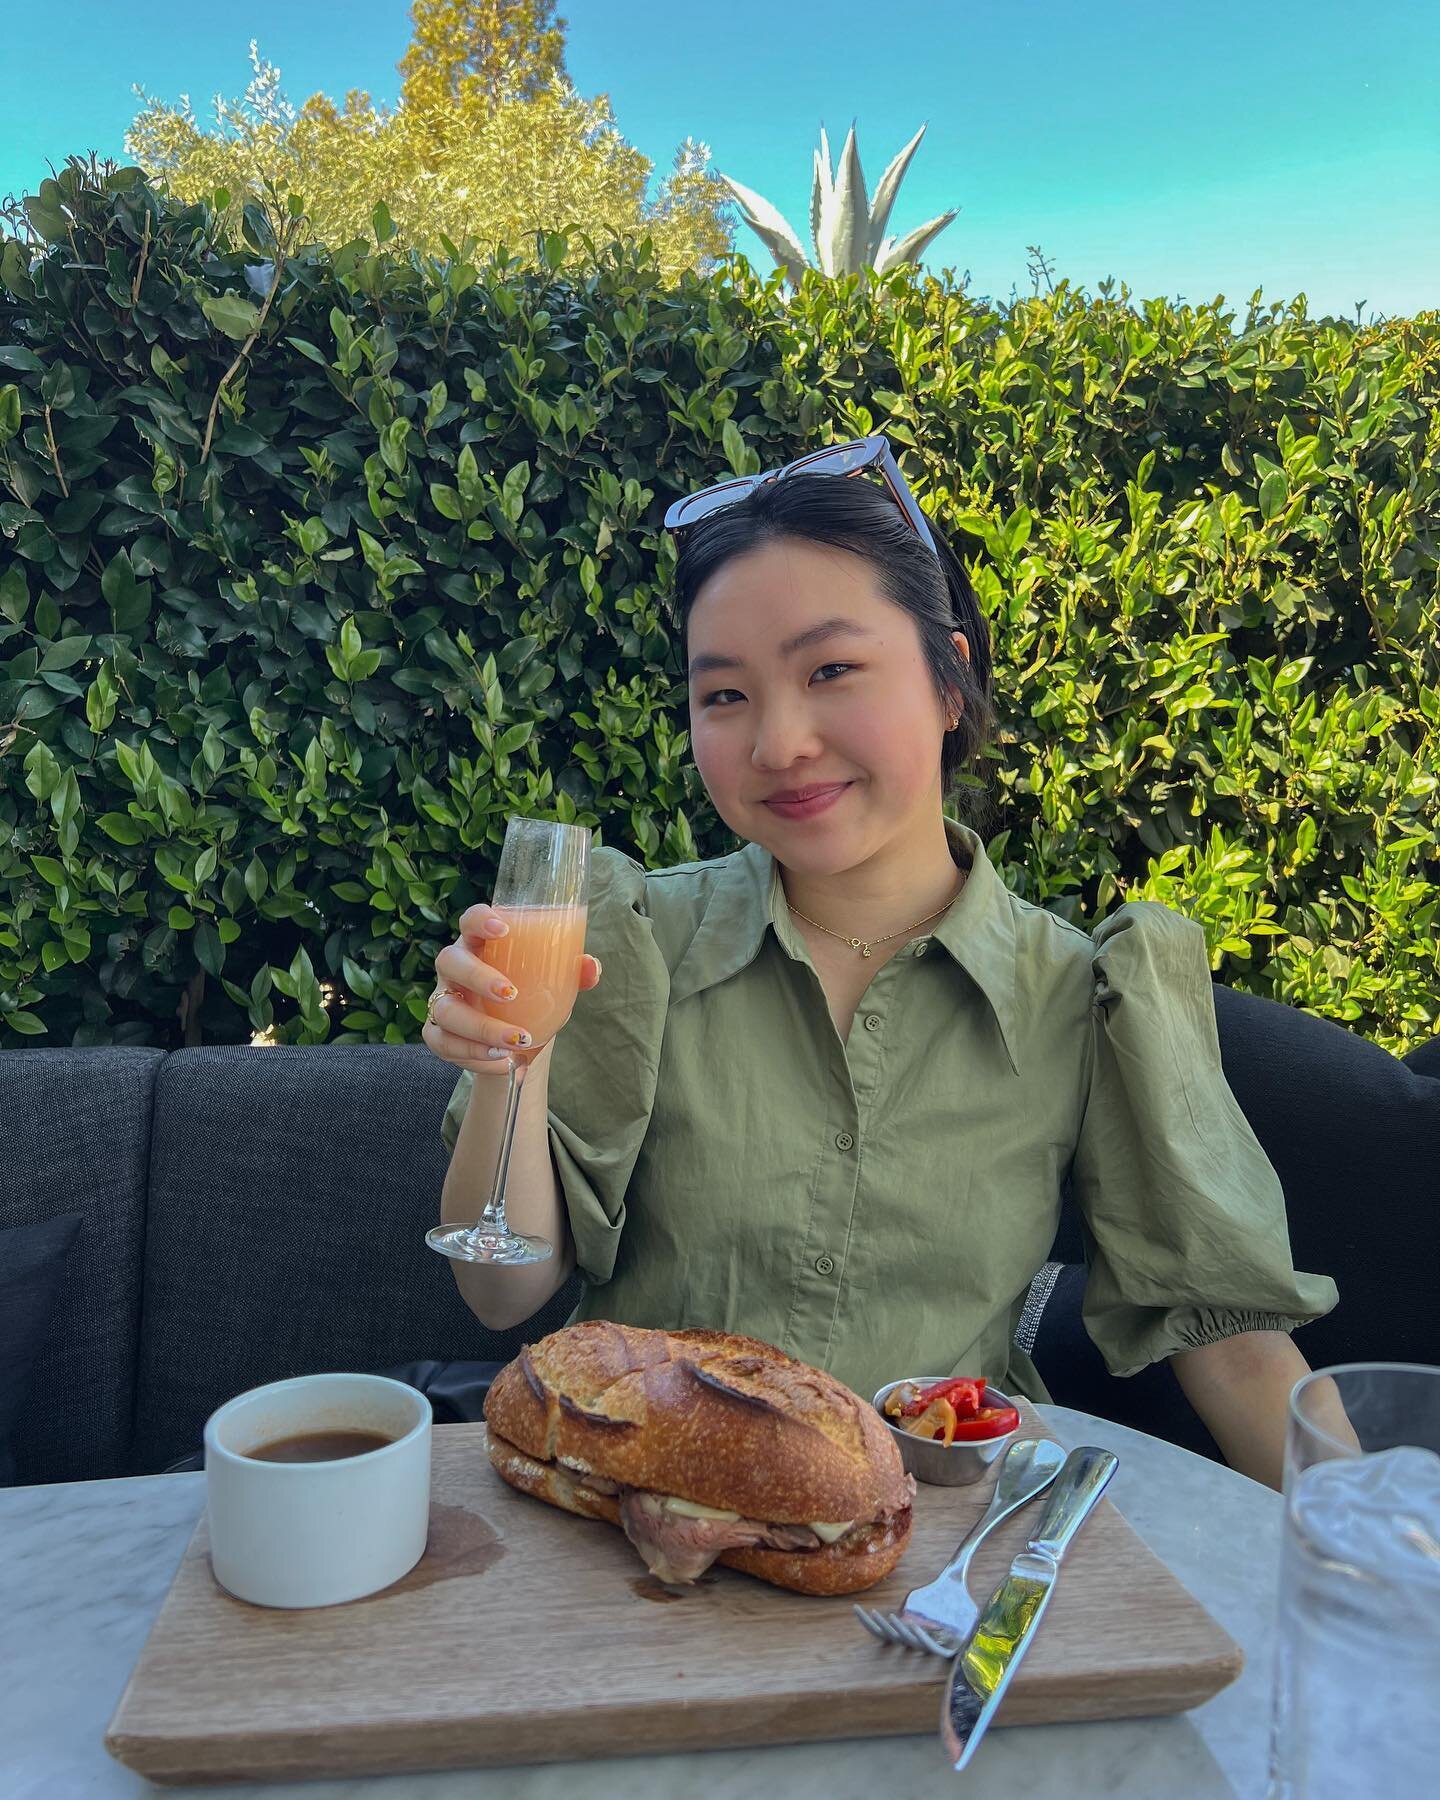 21 is starting off as sweet as this peach bellini🥂 

Thank you for the birthday wishes and for 50k! It was the cherry on top for this weekend 🥰